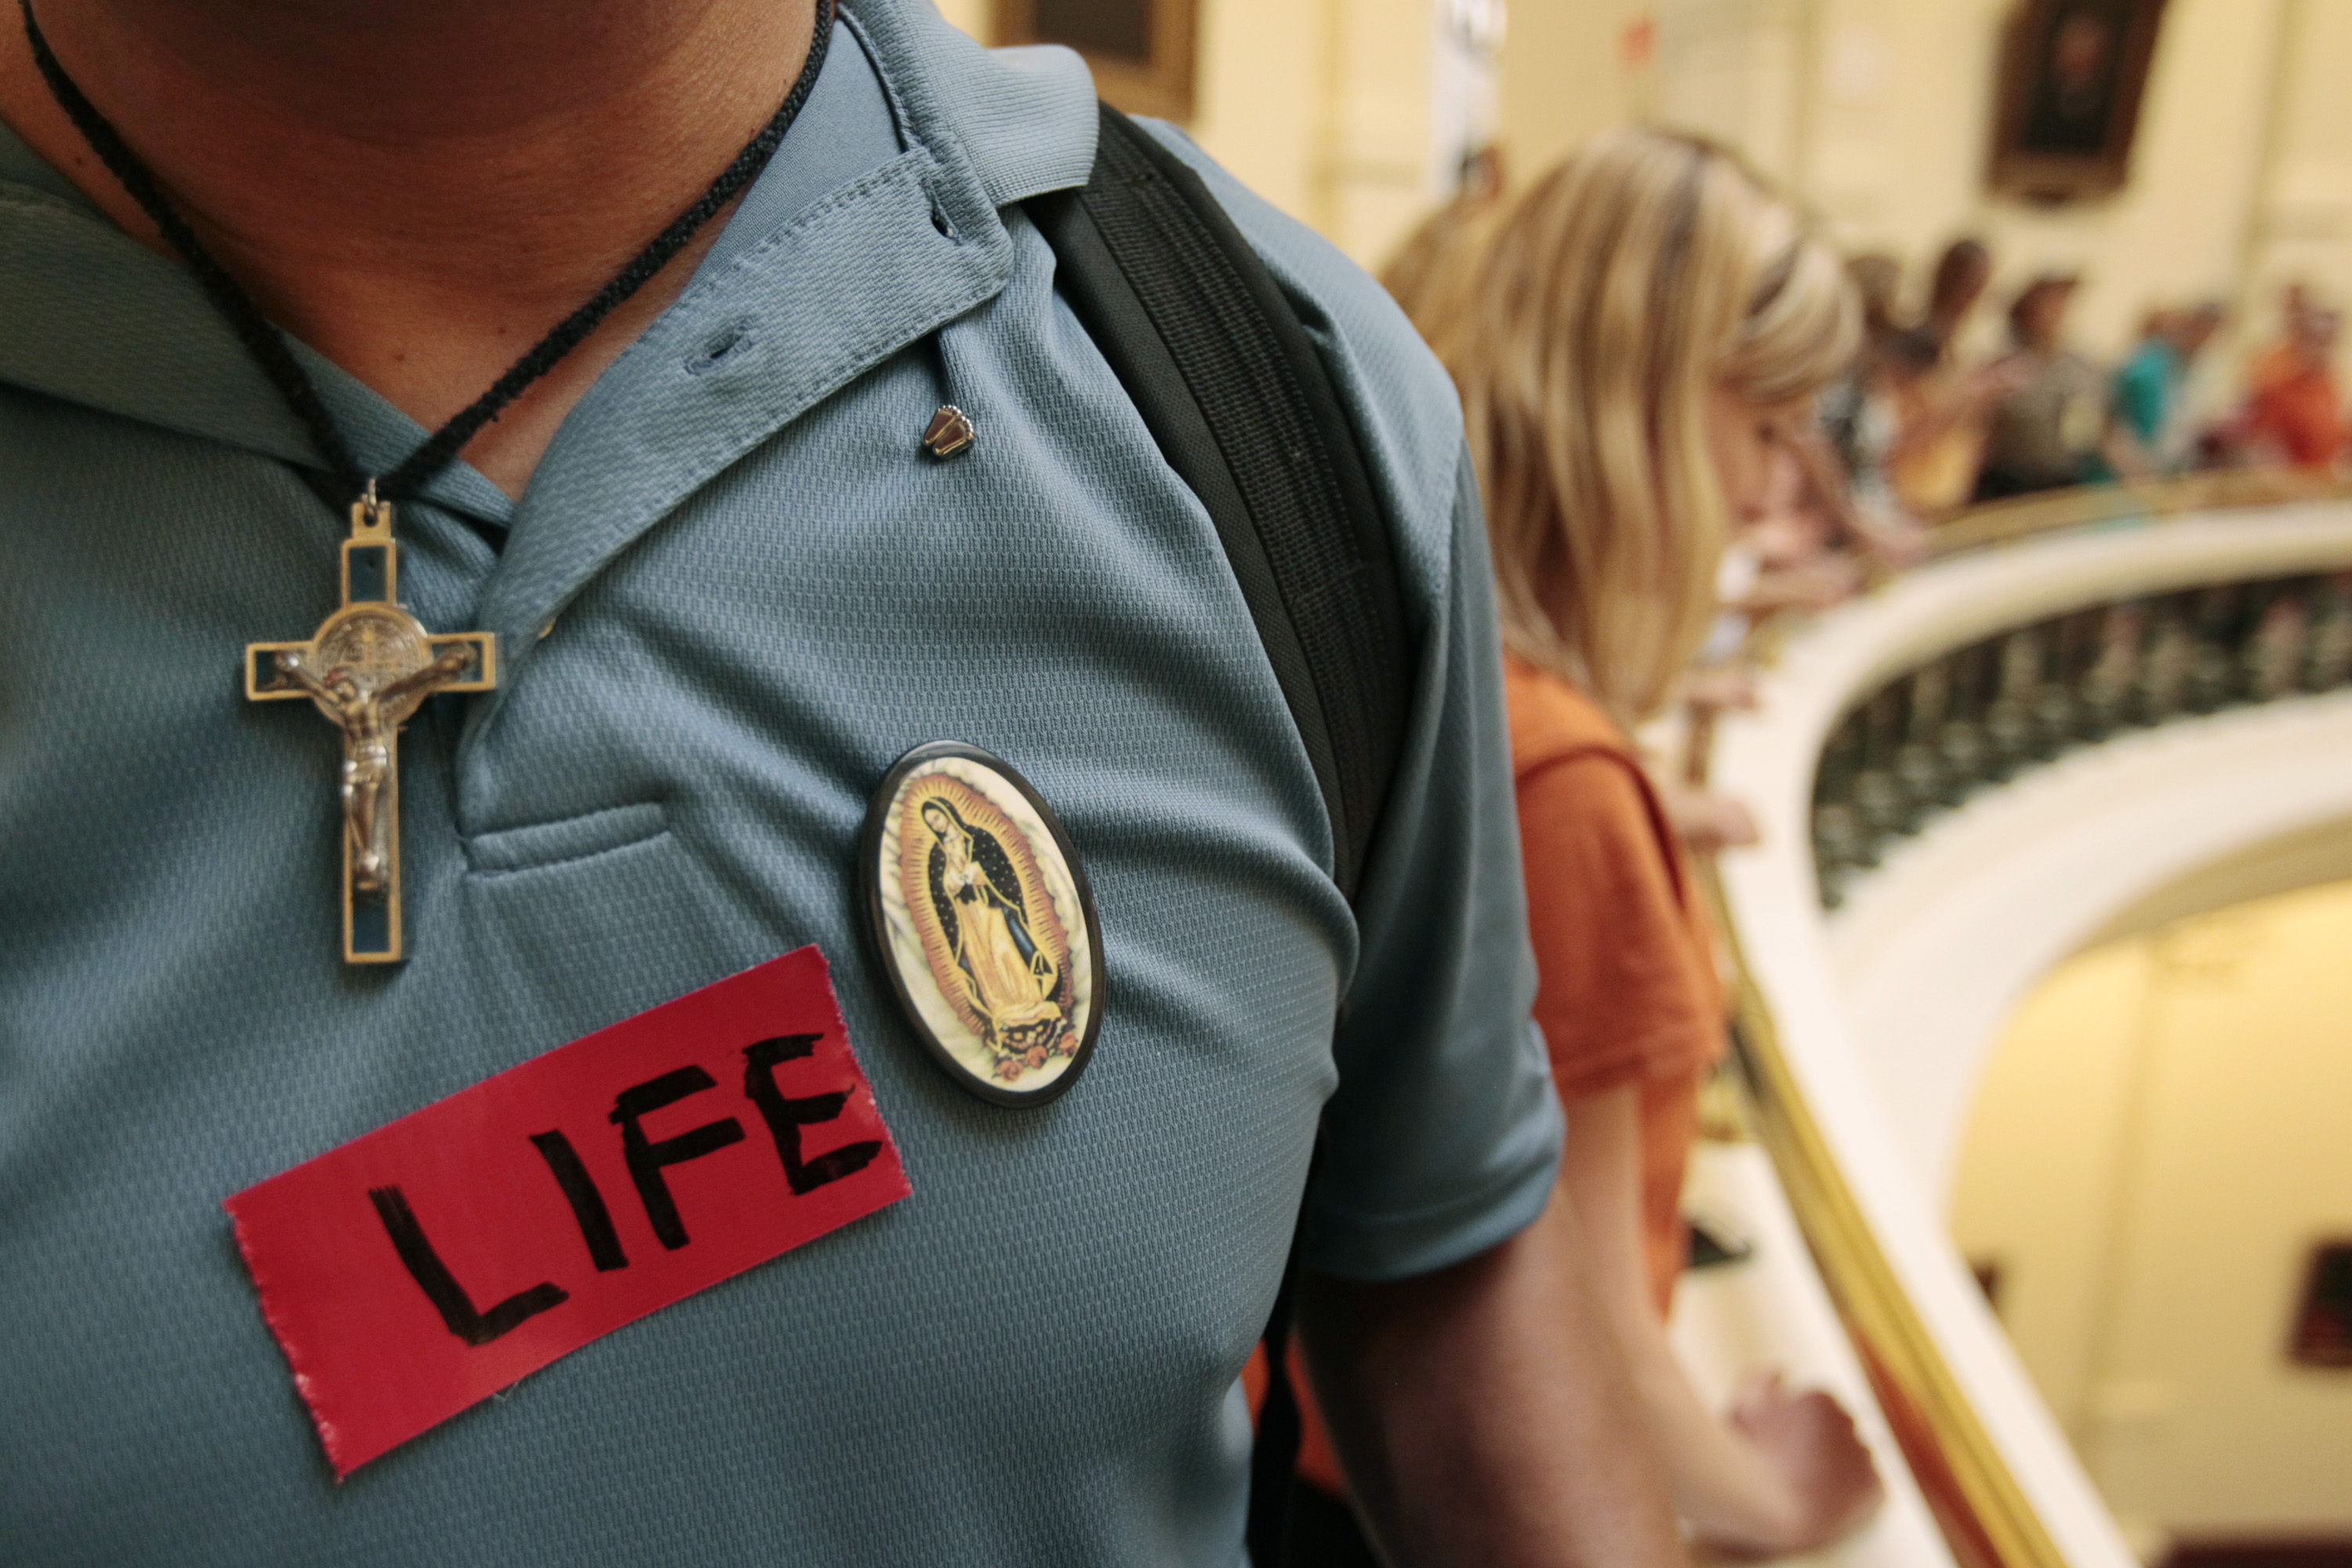 A pro-life supporter in the Texas State capitol.